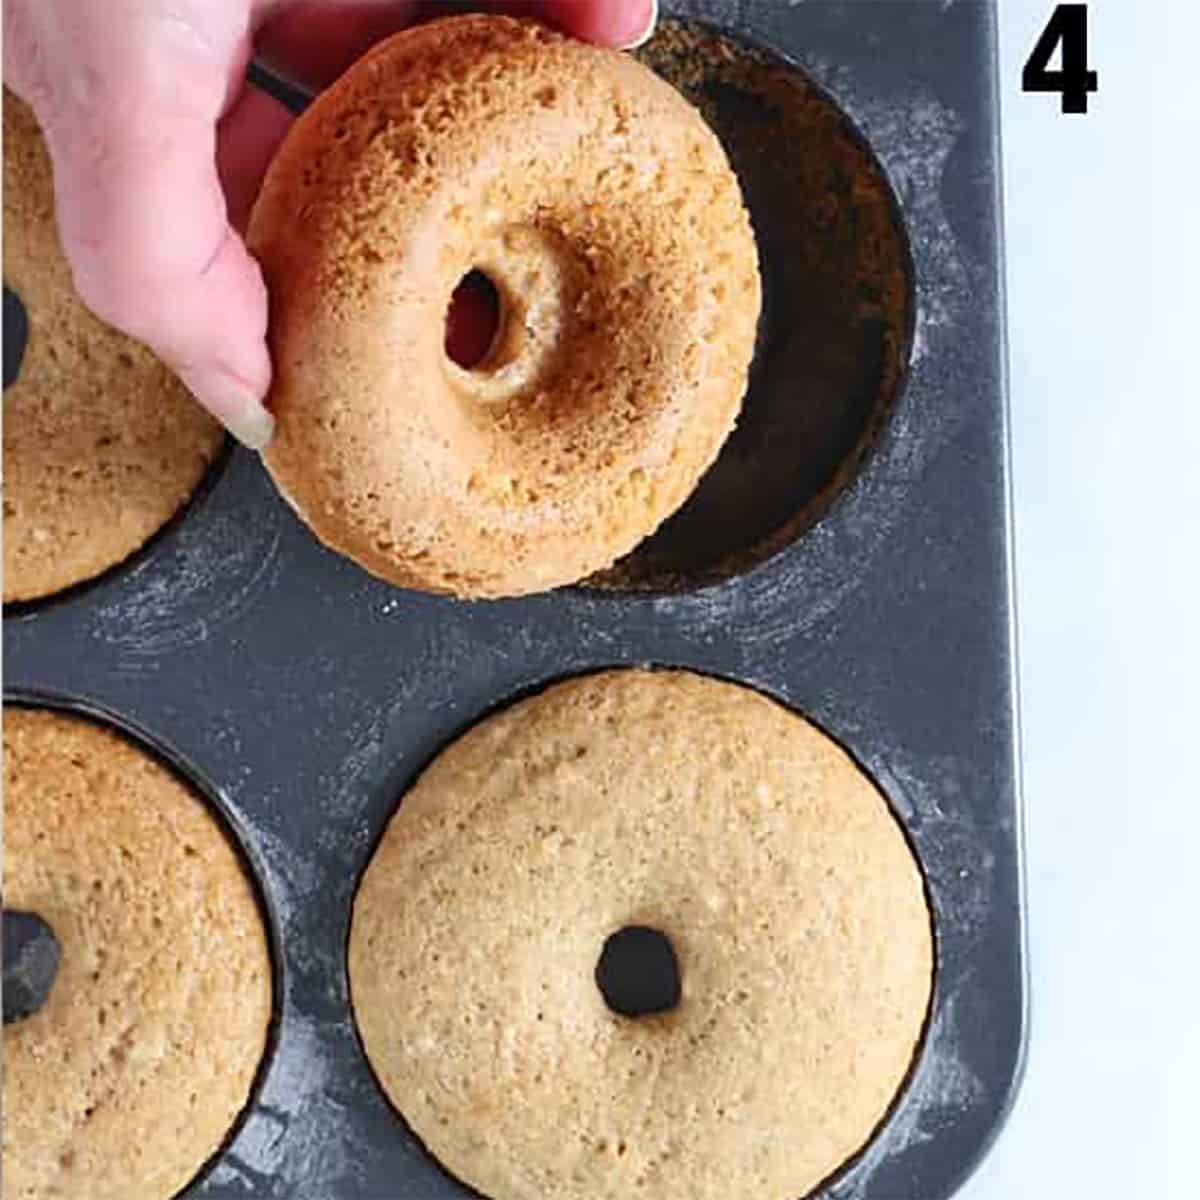 bake the donuts in a donuts pan.